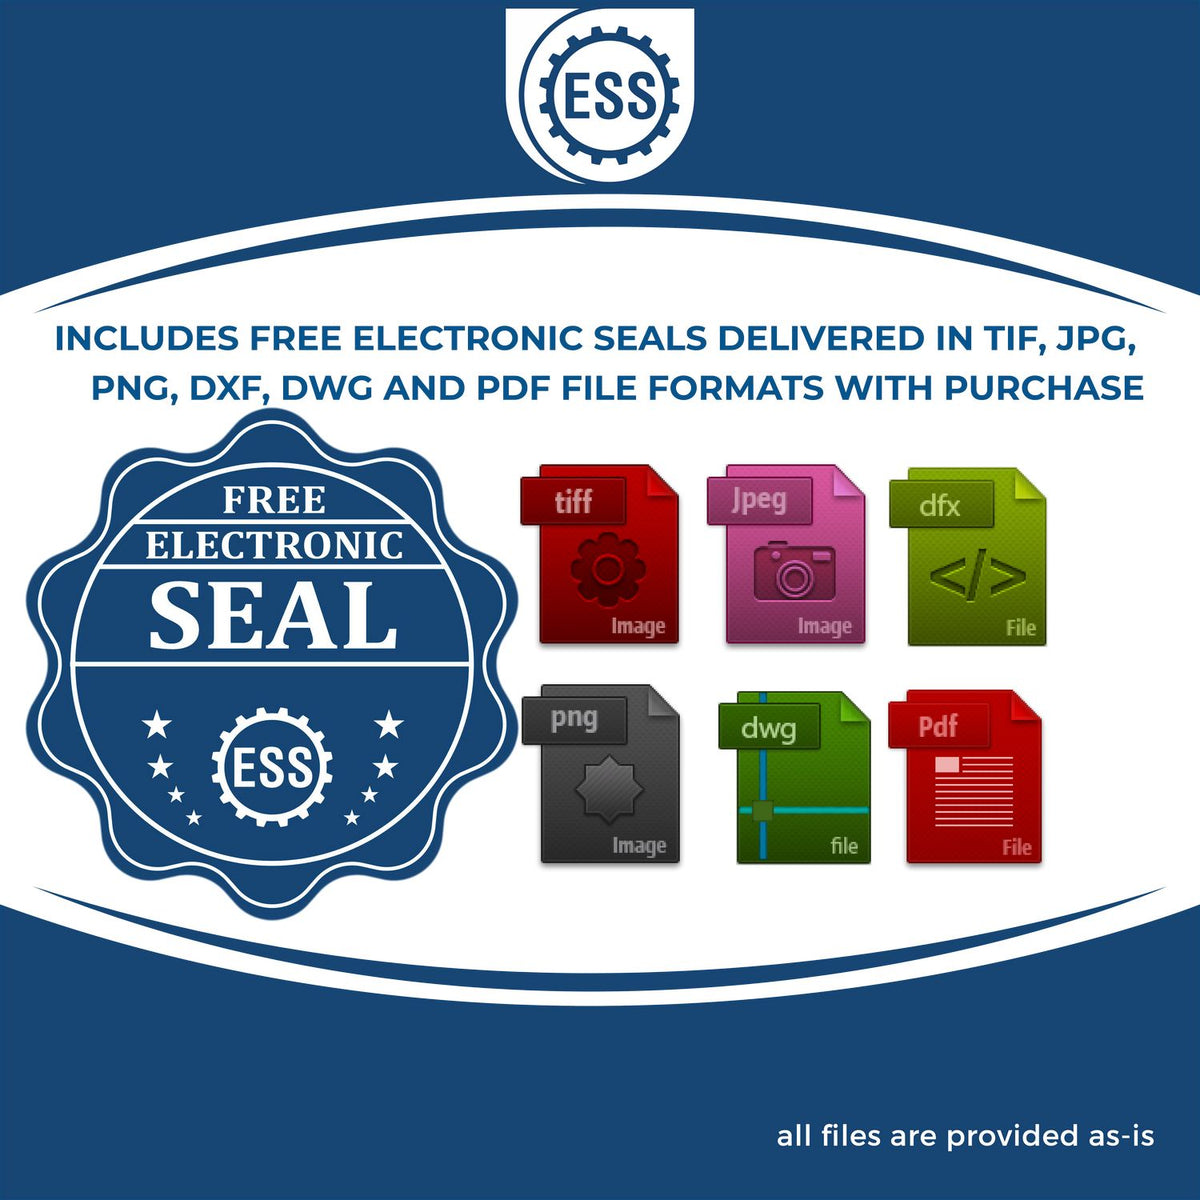 An infographic for the free electronic seal for the Self-Inking Virginia PE Stamp illustrating the different file type icons such as DXF, DWG, TIF, JPG and PNG.